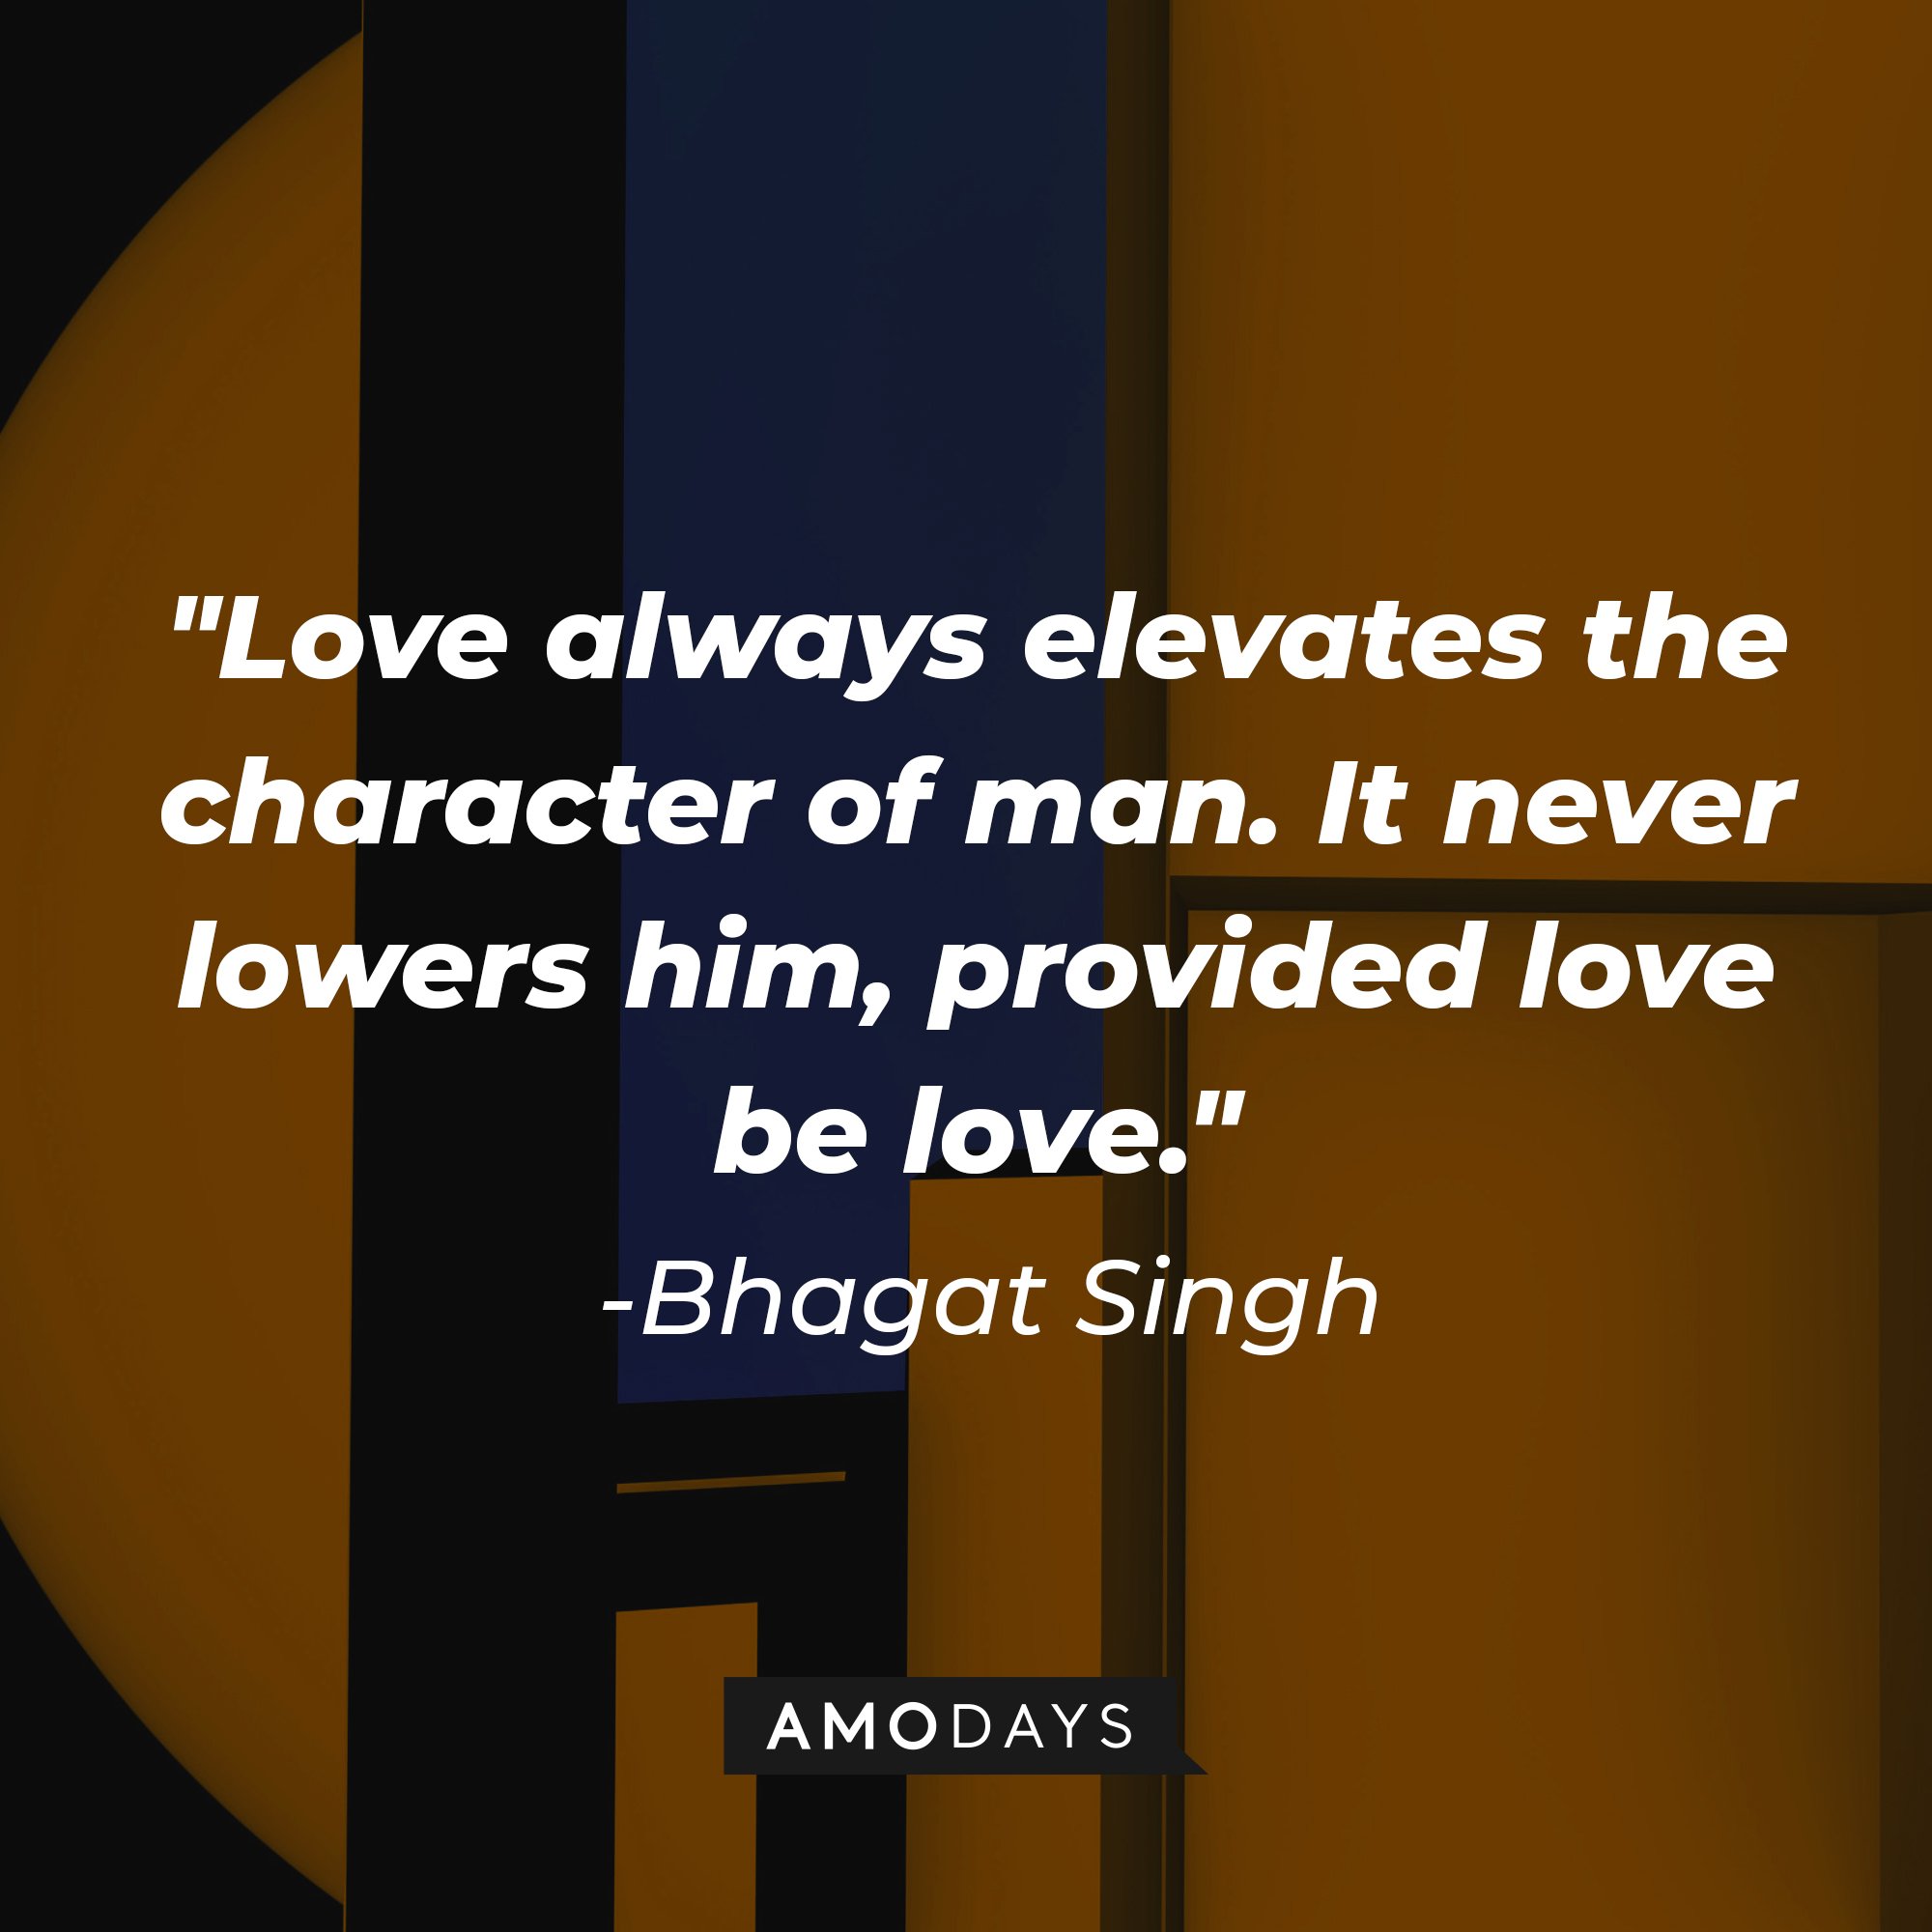 Bhagat Singh’s quote: "Love always elevates the character of man. It never lowers him, provided love be love." | Image: AmoDays